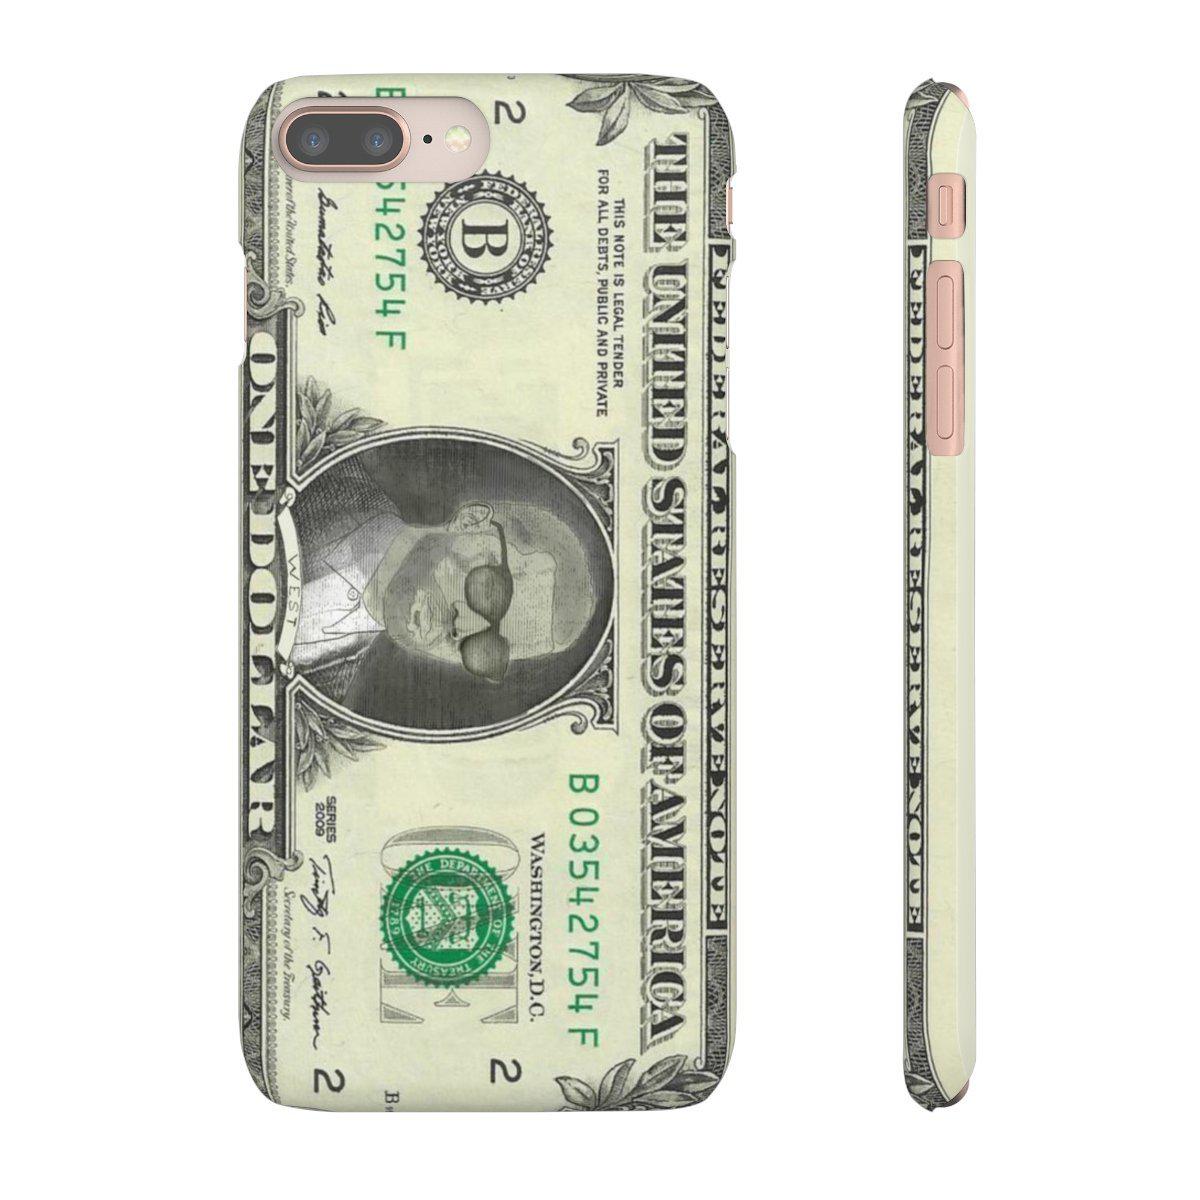 Kanye West President face on 1 dollar bill case iPhone Snap Case-iPhone 8 Plus-Matte-Archethype